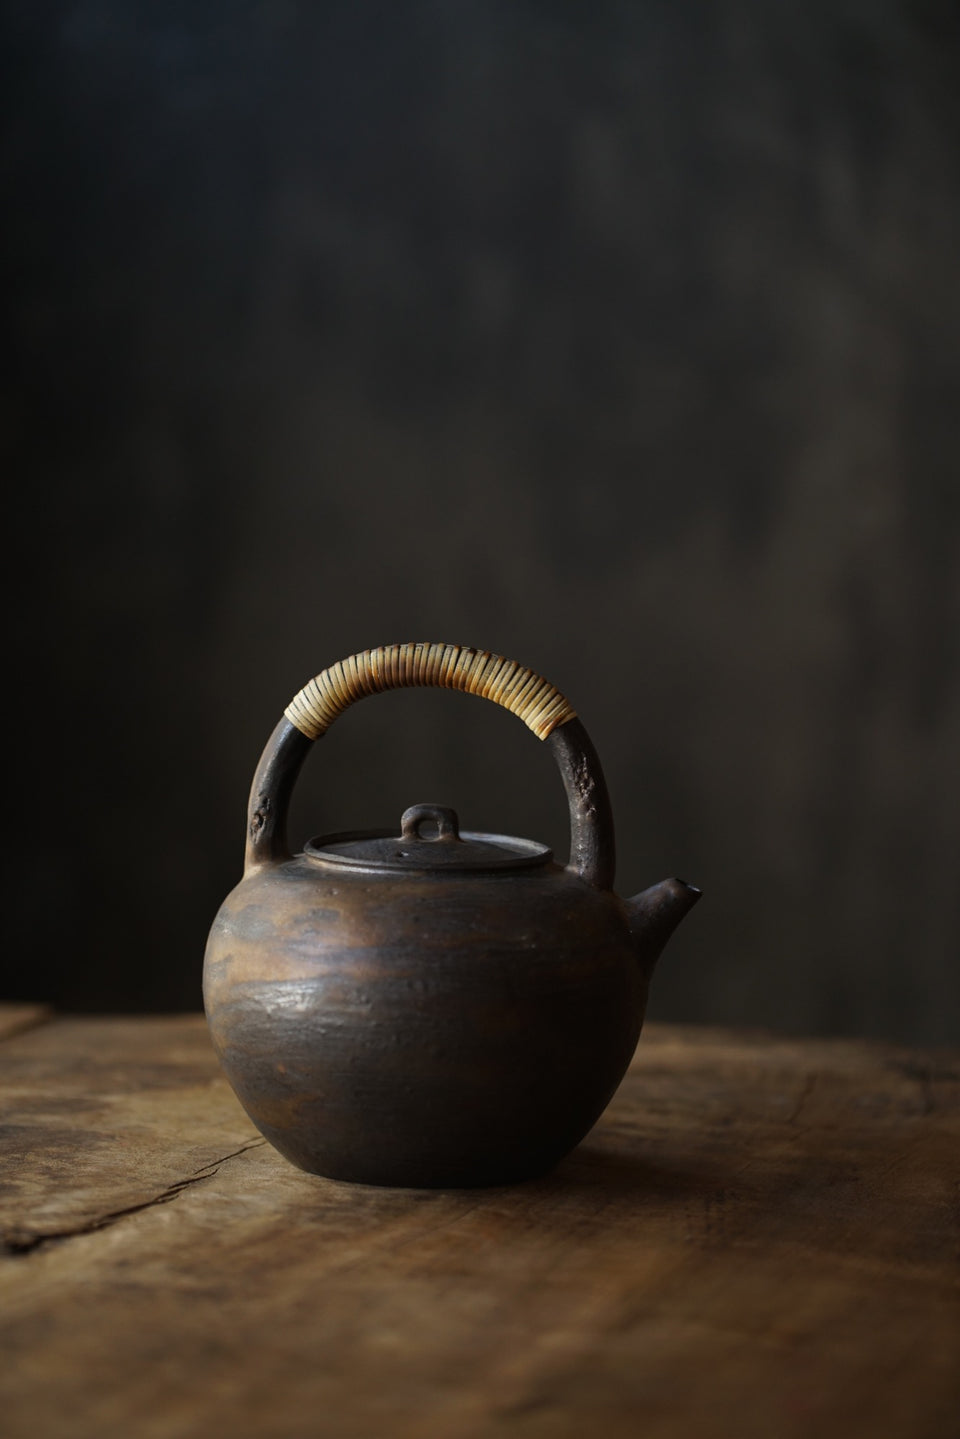 Metal Glazed Ceramic Kettle with Bamboo Skin Handle